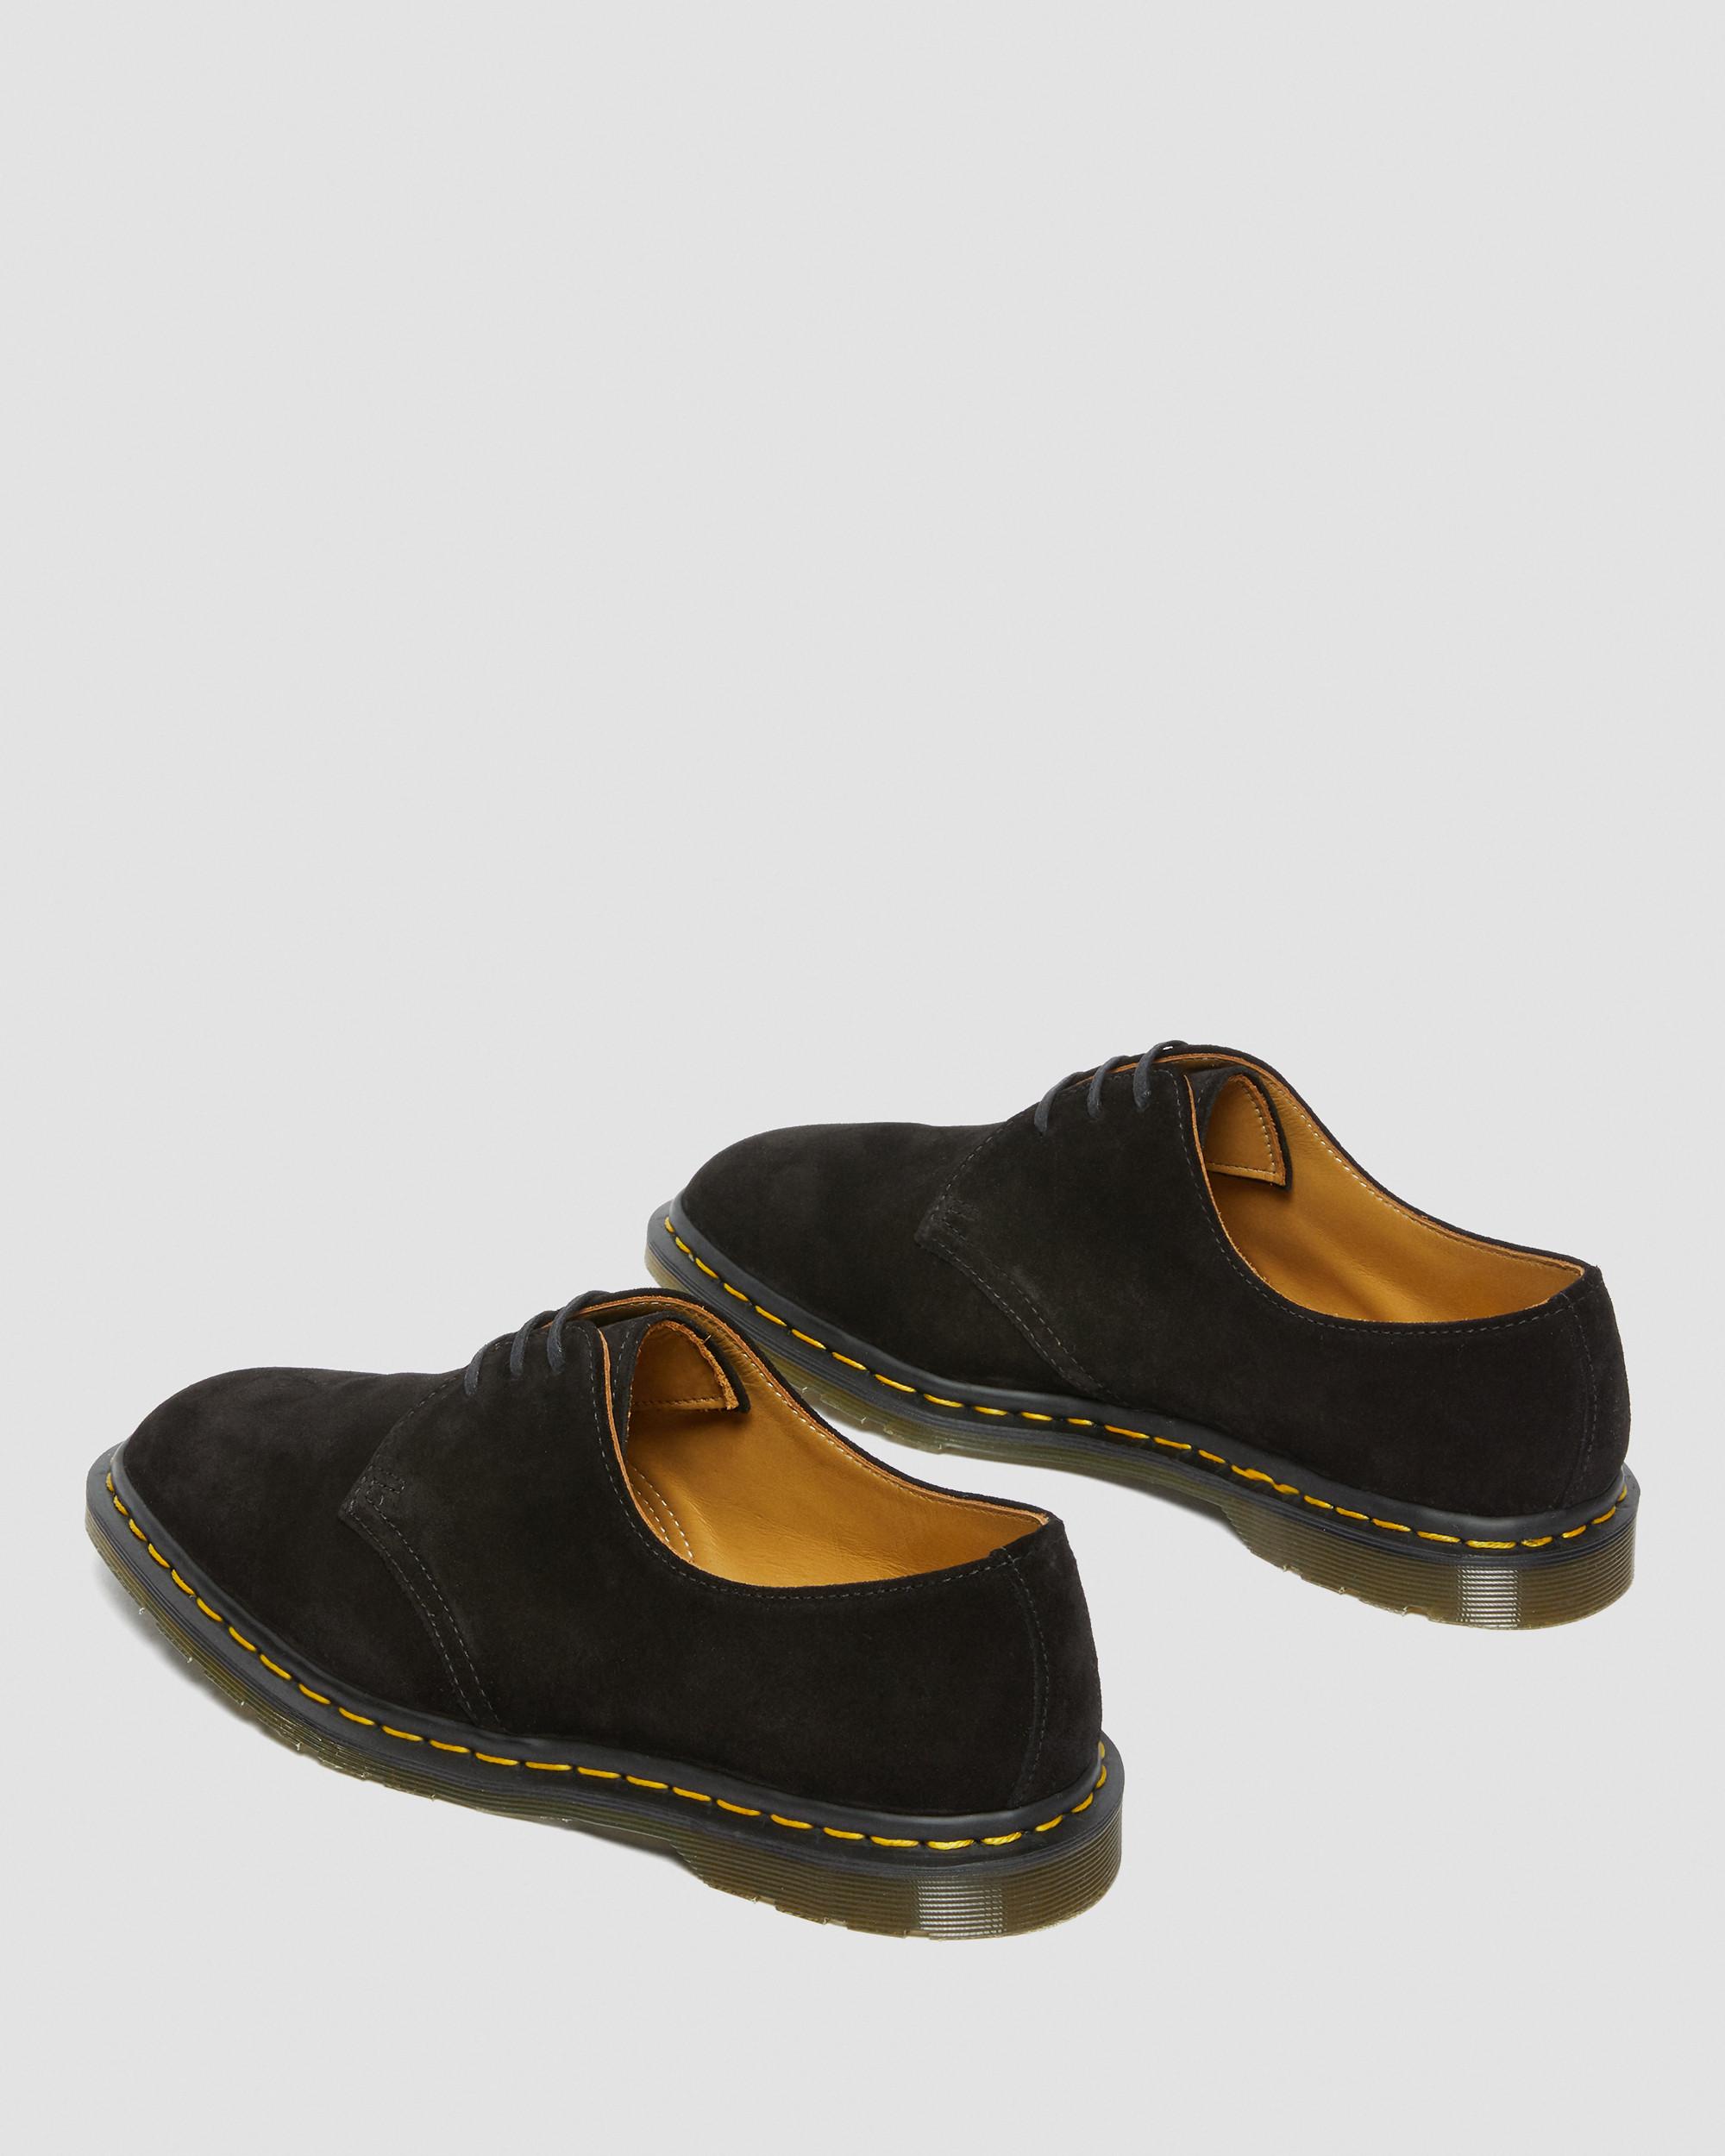 Archie II Made in England Suede Oxford Shoes in Black | Dr. Martens